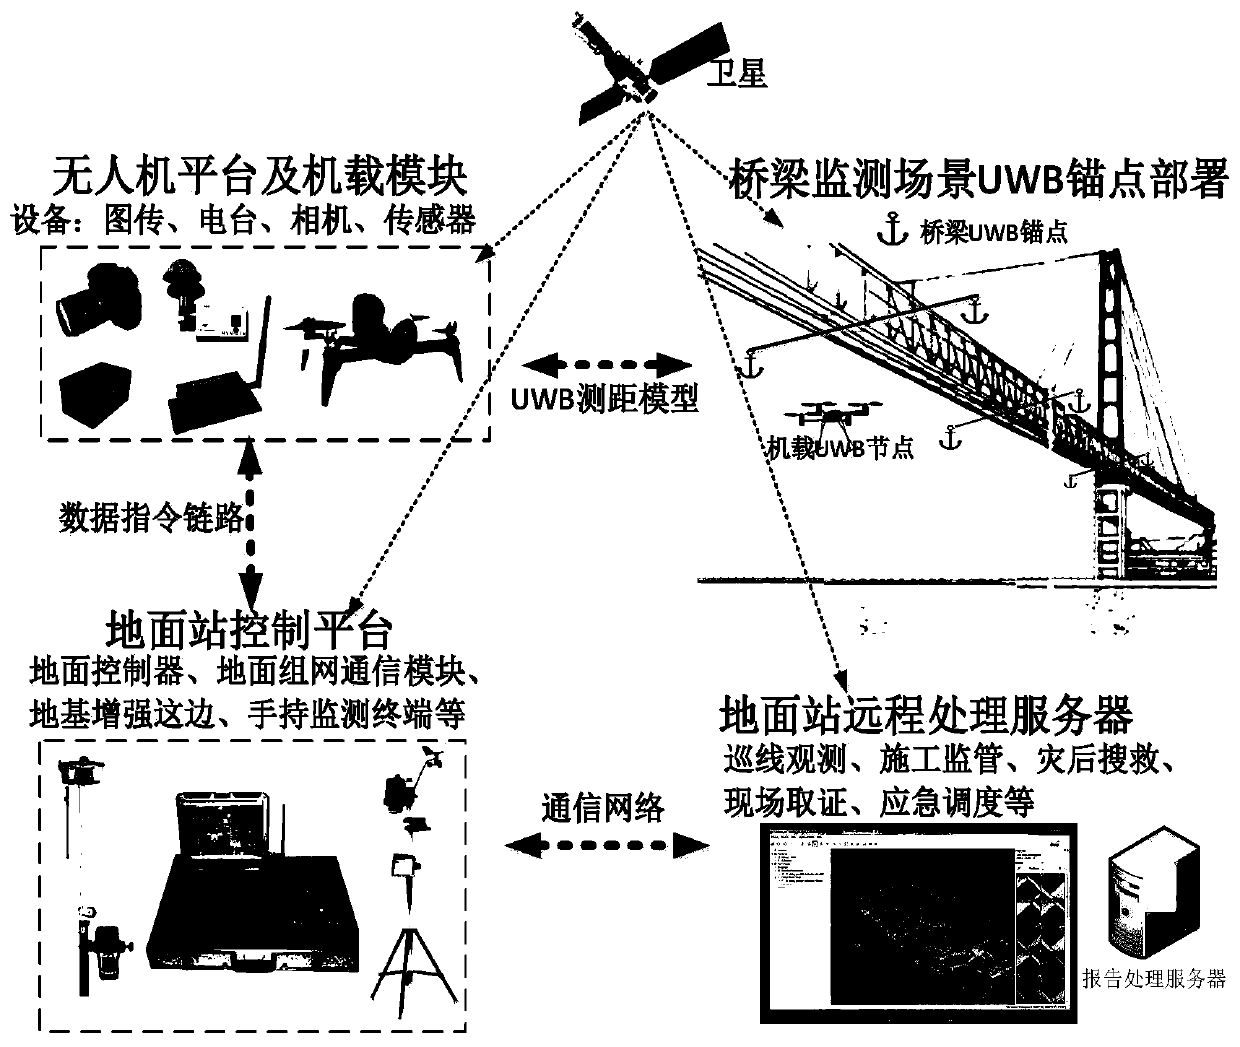 Bridge detecting unmanned aerial vehicle system in non-satellite navigating and positioning environment